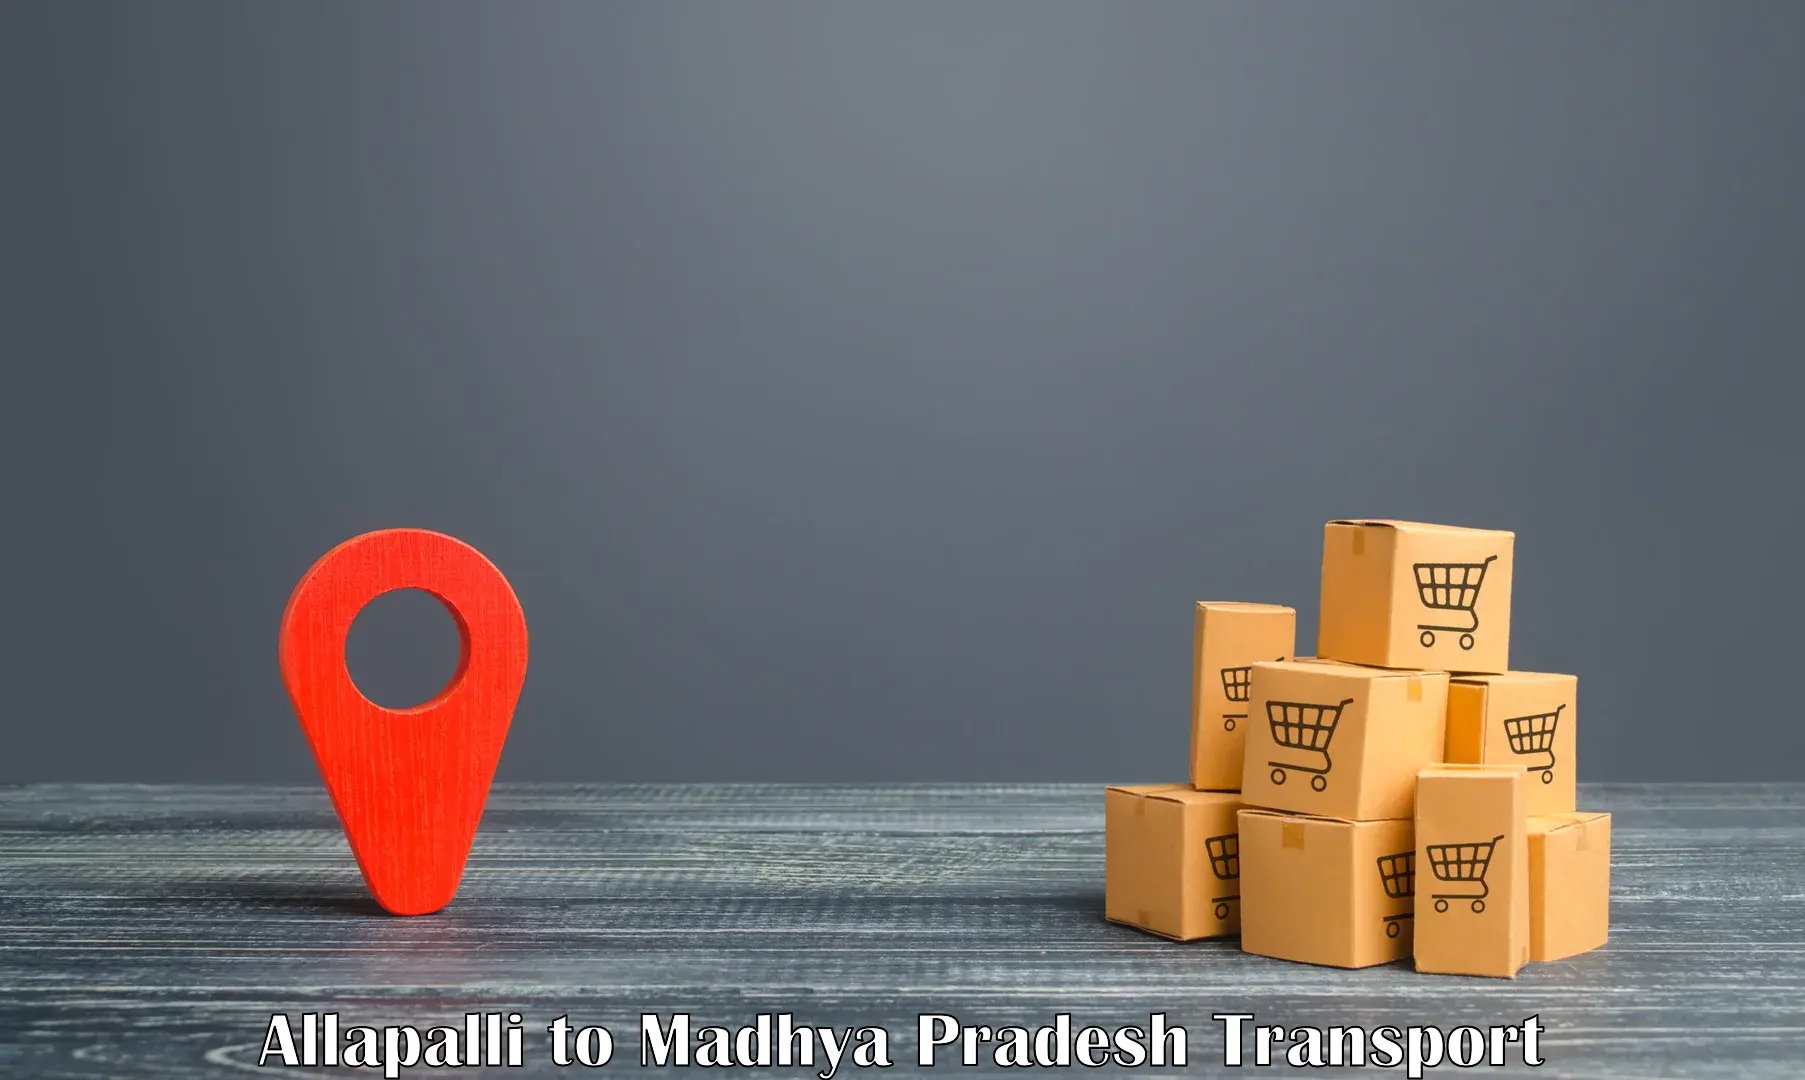 Shipping services Allapalli to BHEL Bhopal